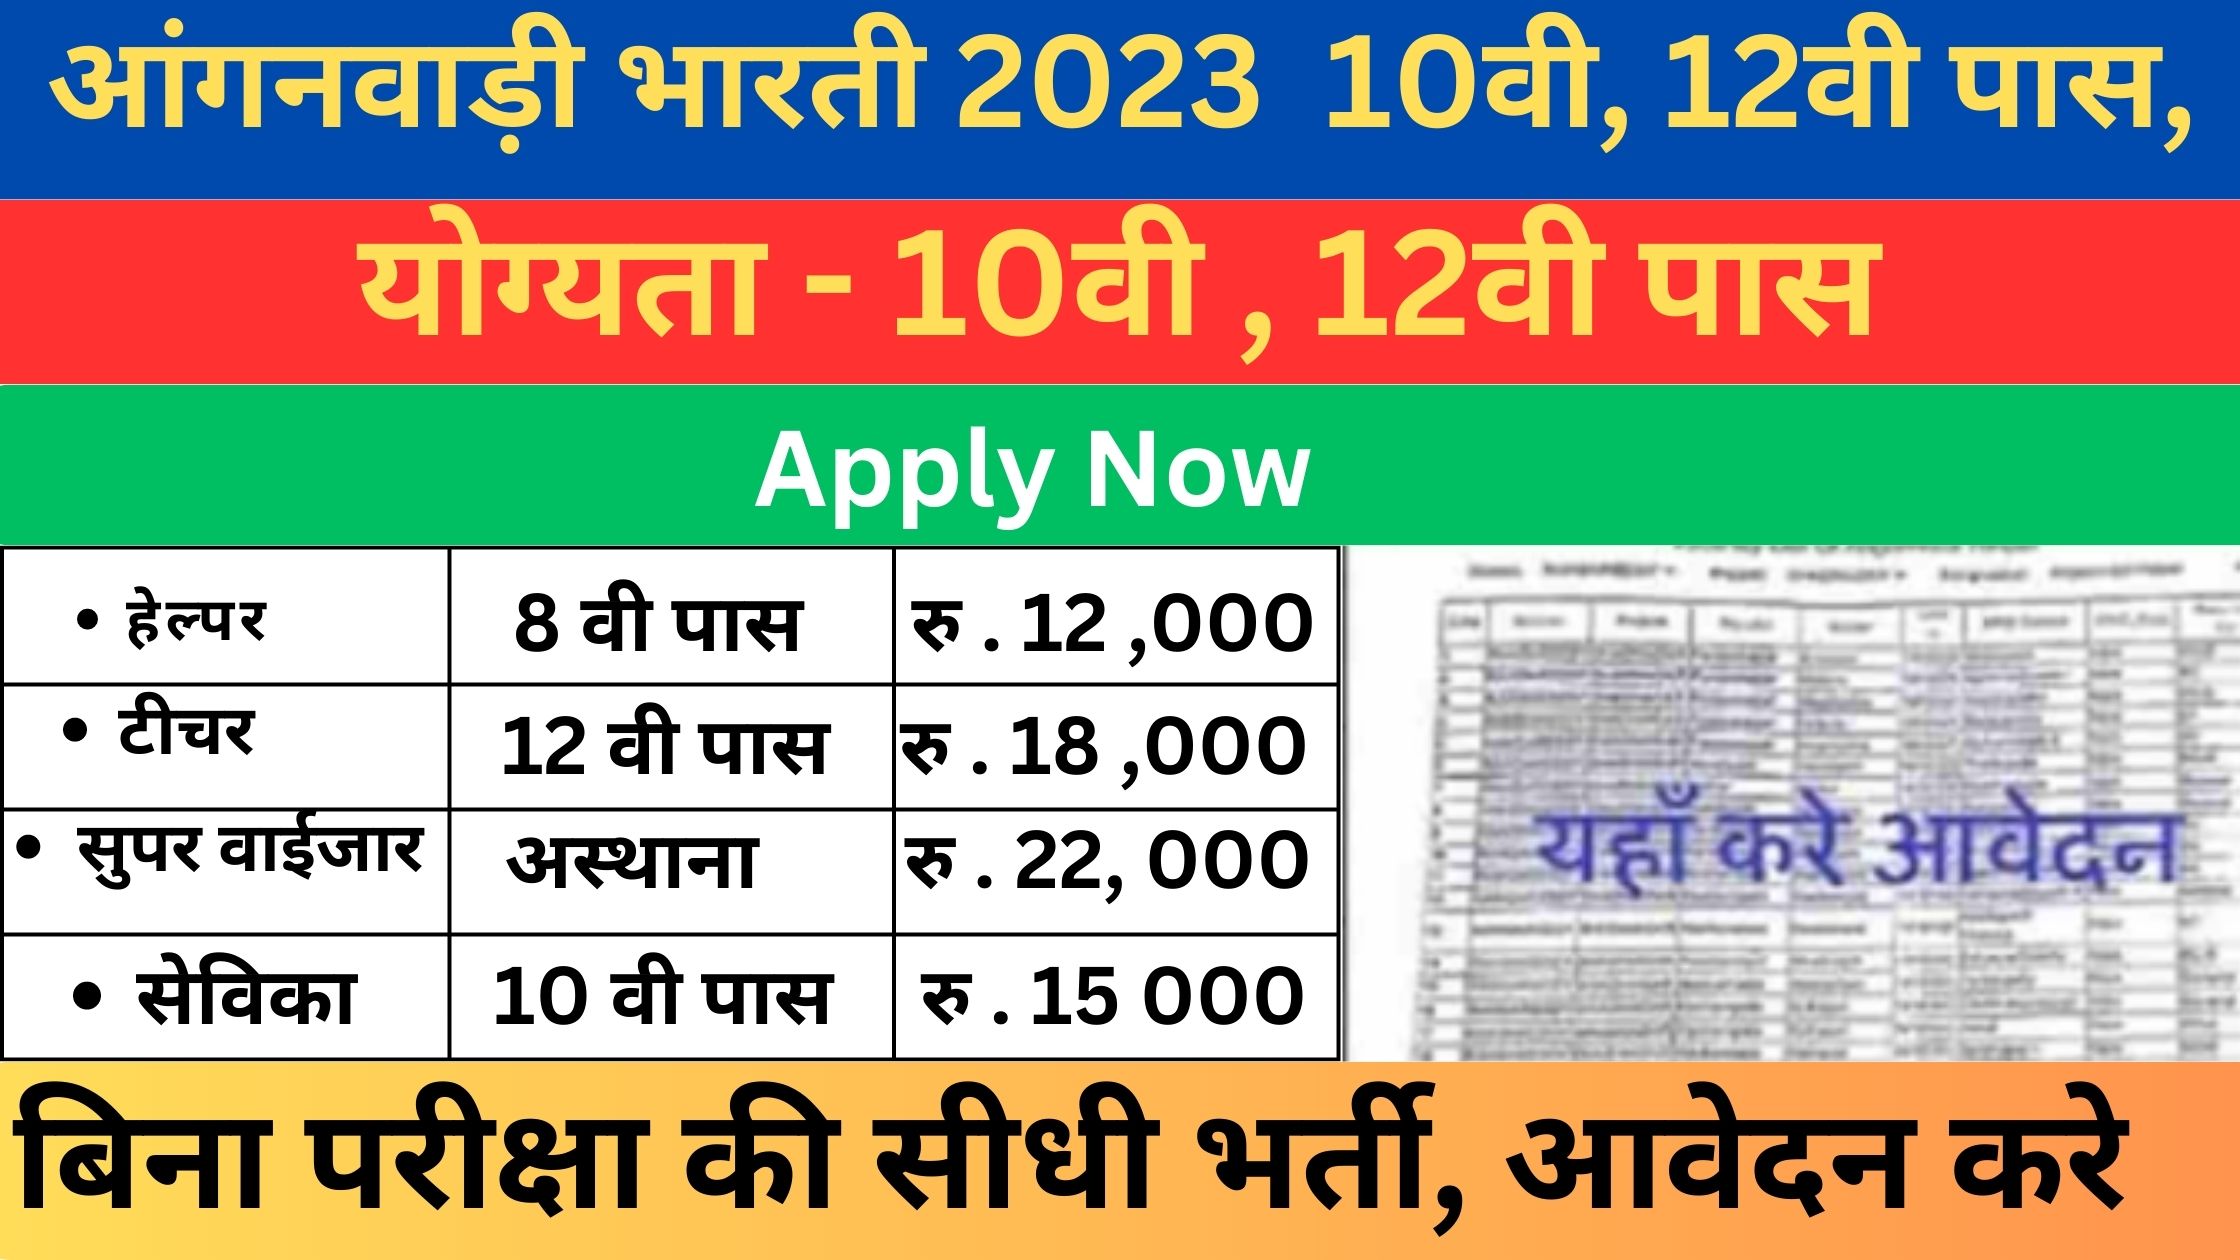 Anganwadi Bharti 2023 10th 12th golden opportunity apply soon